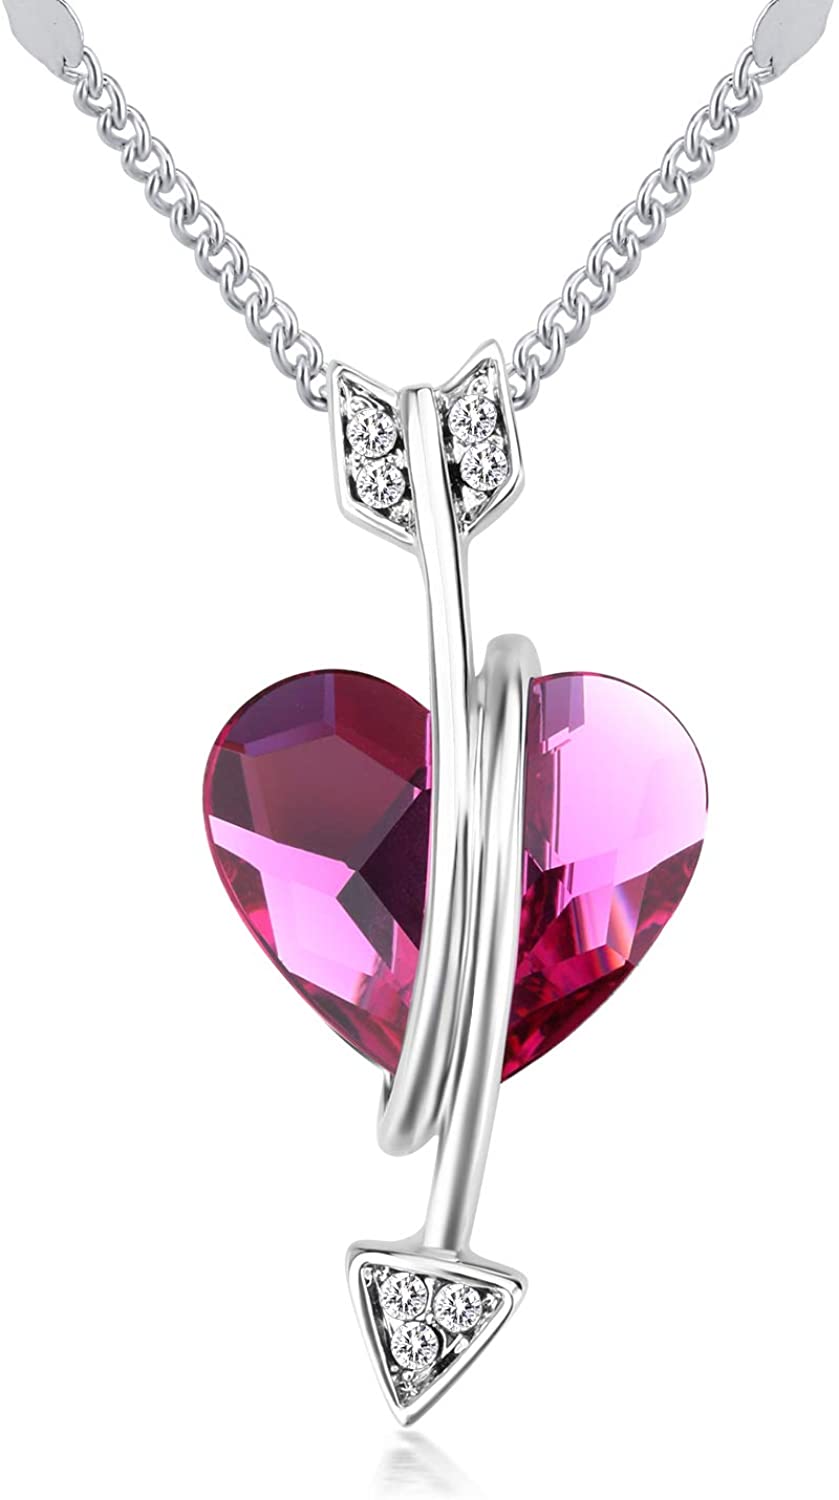 Swarovski Pink Heart Necklace Love Necklace Sparkly Crystal Heart Necklace  925 Sterling Silver Necklace Handmade Valentines Day Gift - Etsy